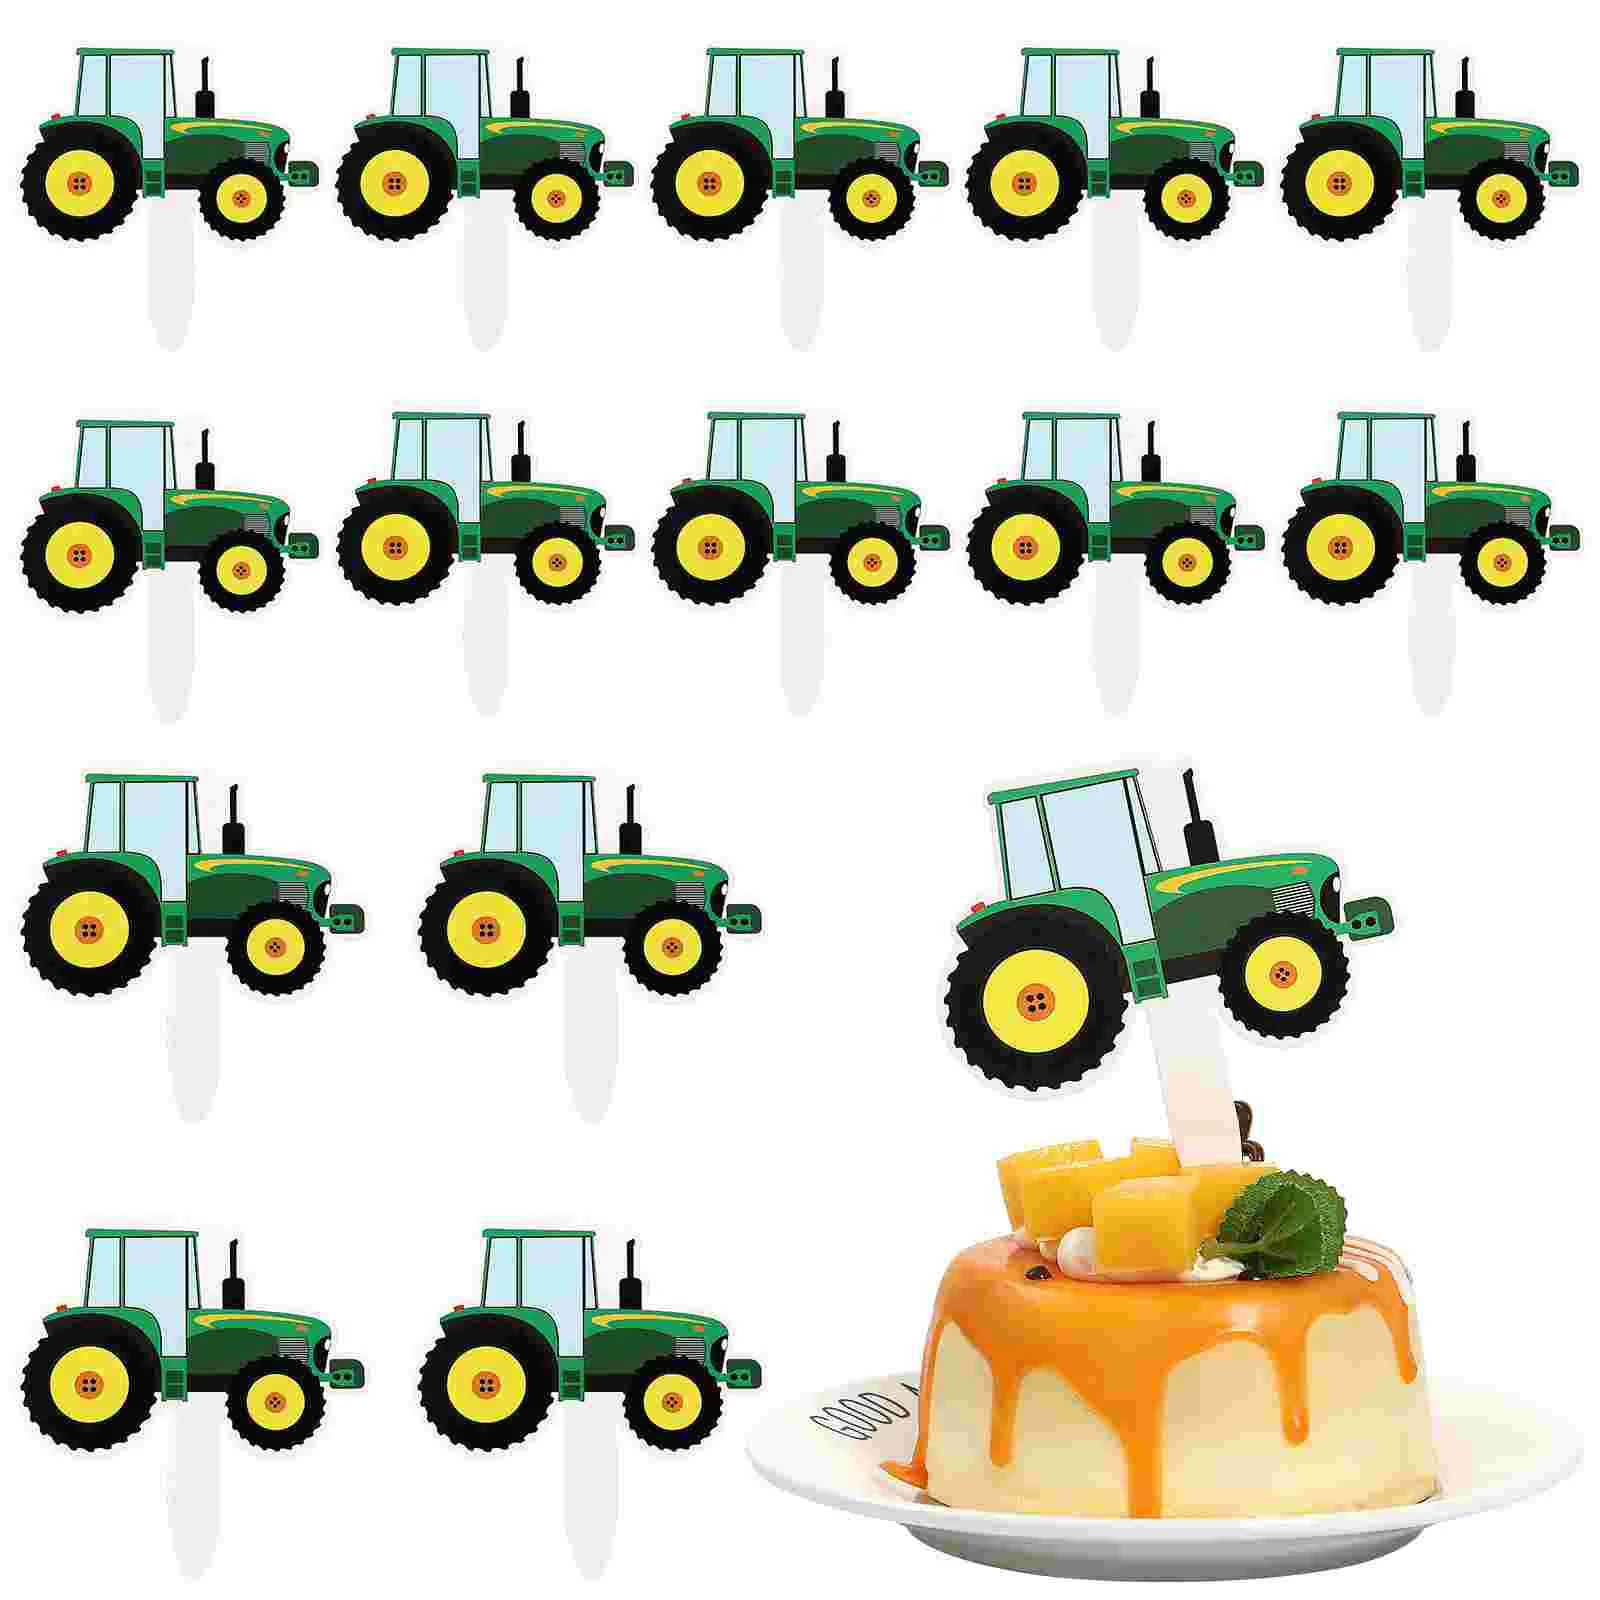 

42 Pcs Excavator Birthday Cupcake Topper Tractor Cupcakes Birthday Cake Construction Theme Birthday Party Supplies